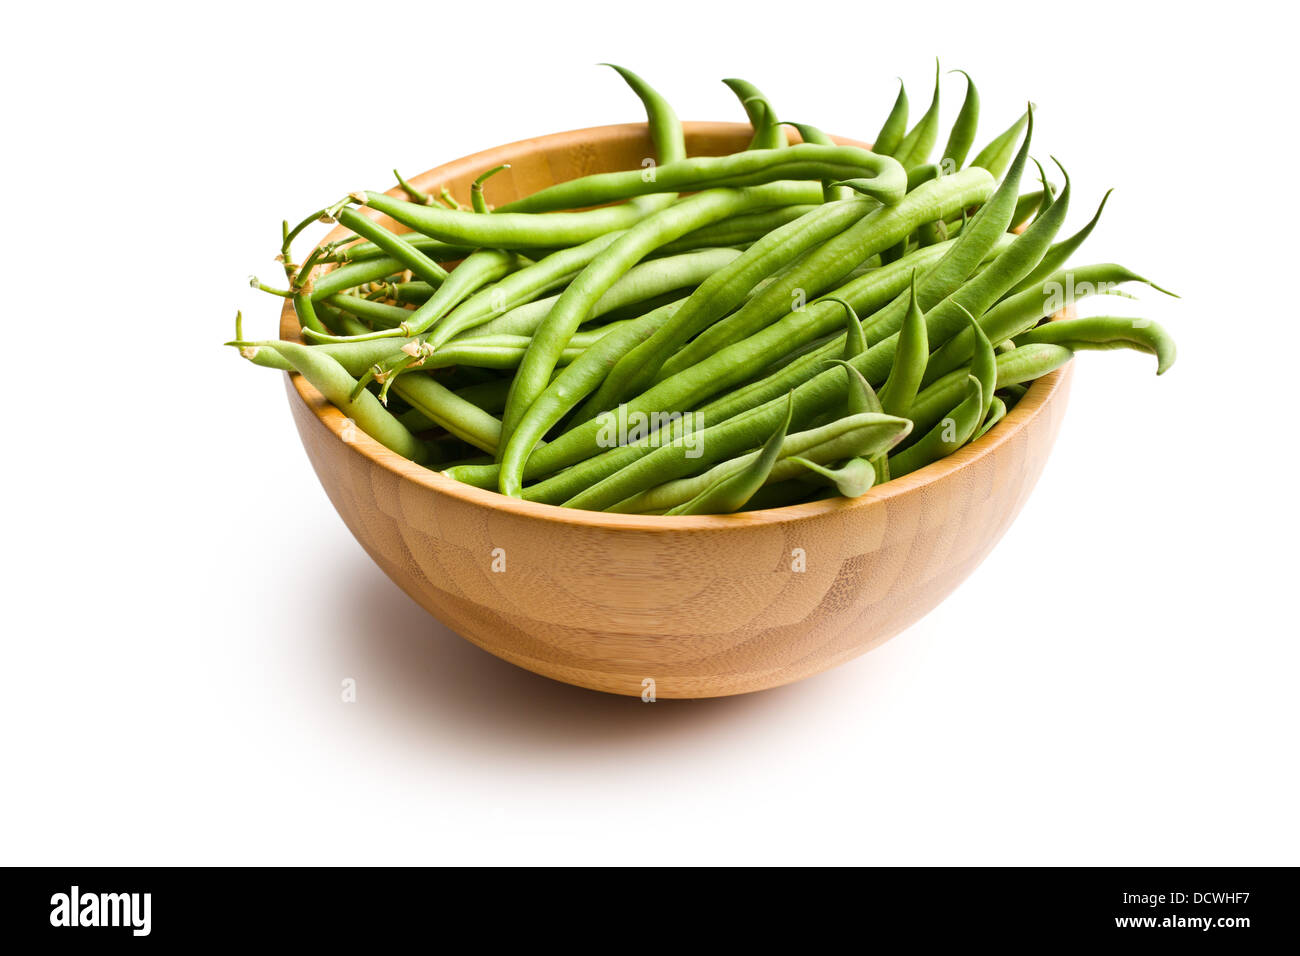 the fresh green beans in wooden bowl Stock Photo